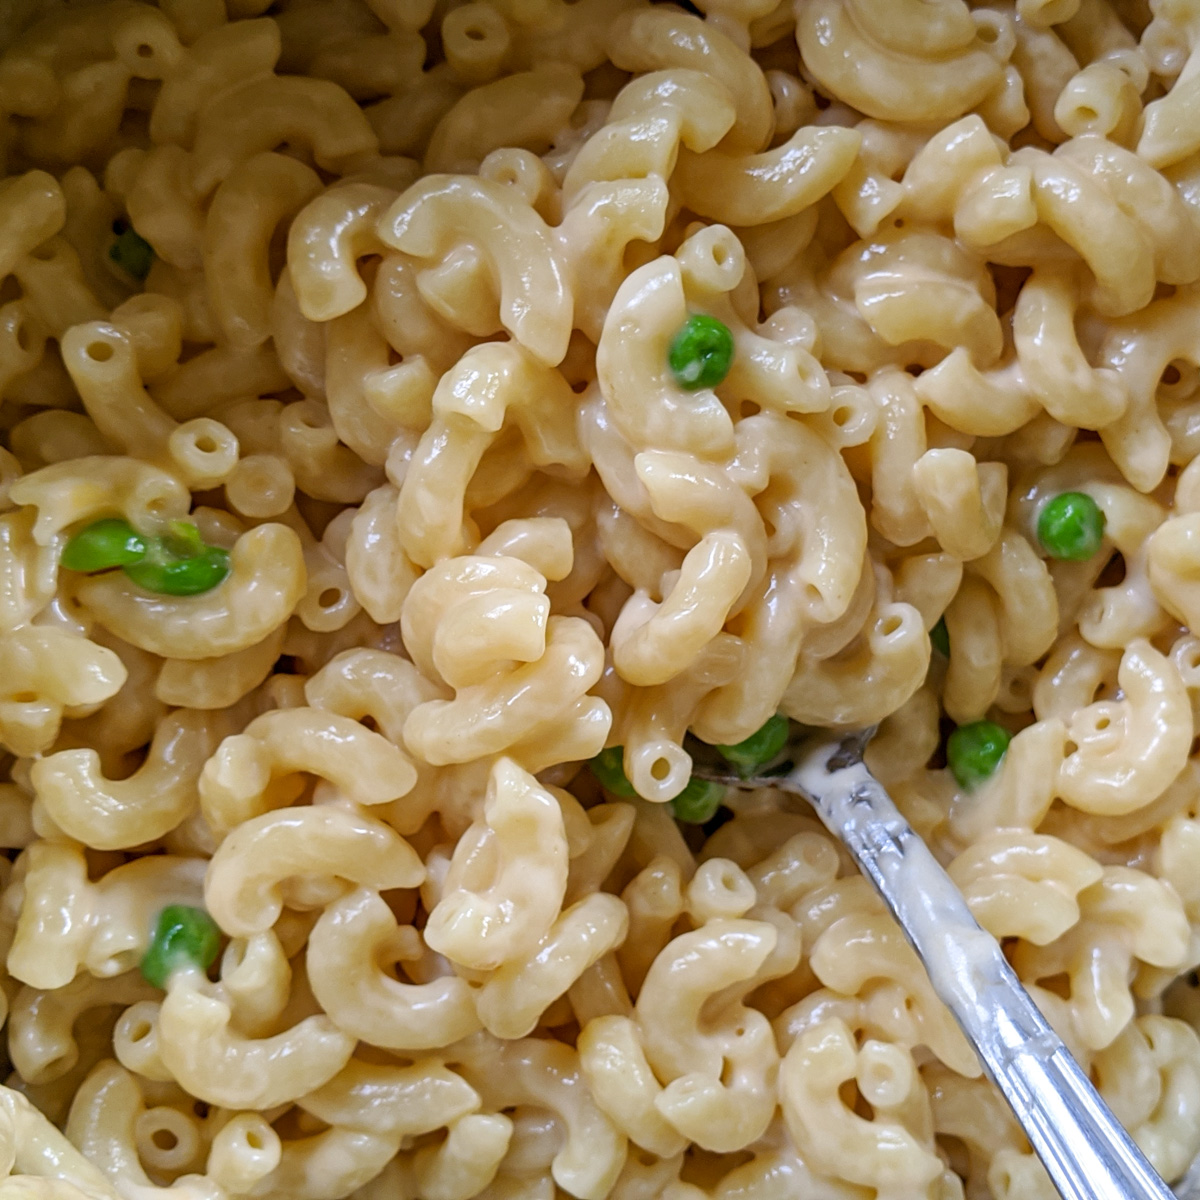 A close up of kids mac and cheese with a few green peas mixed in.